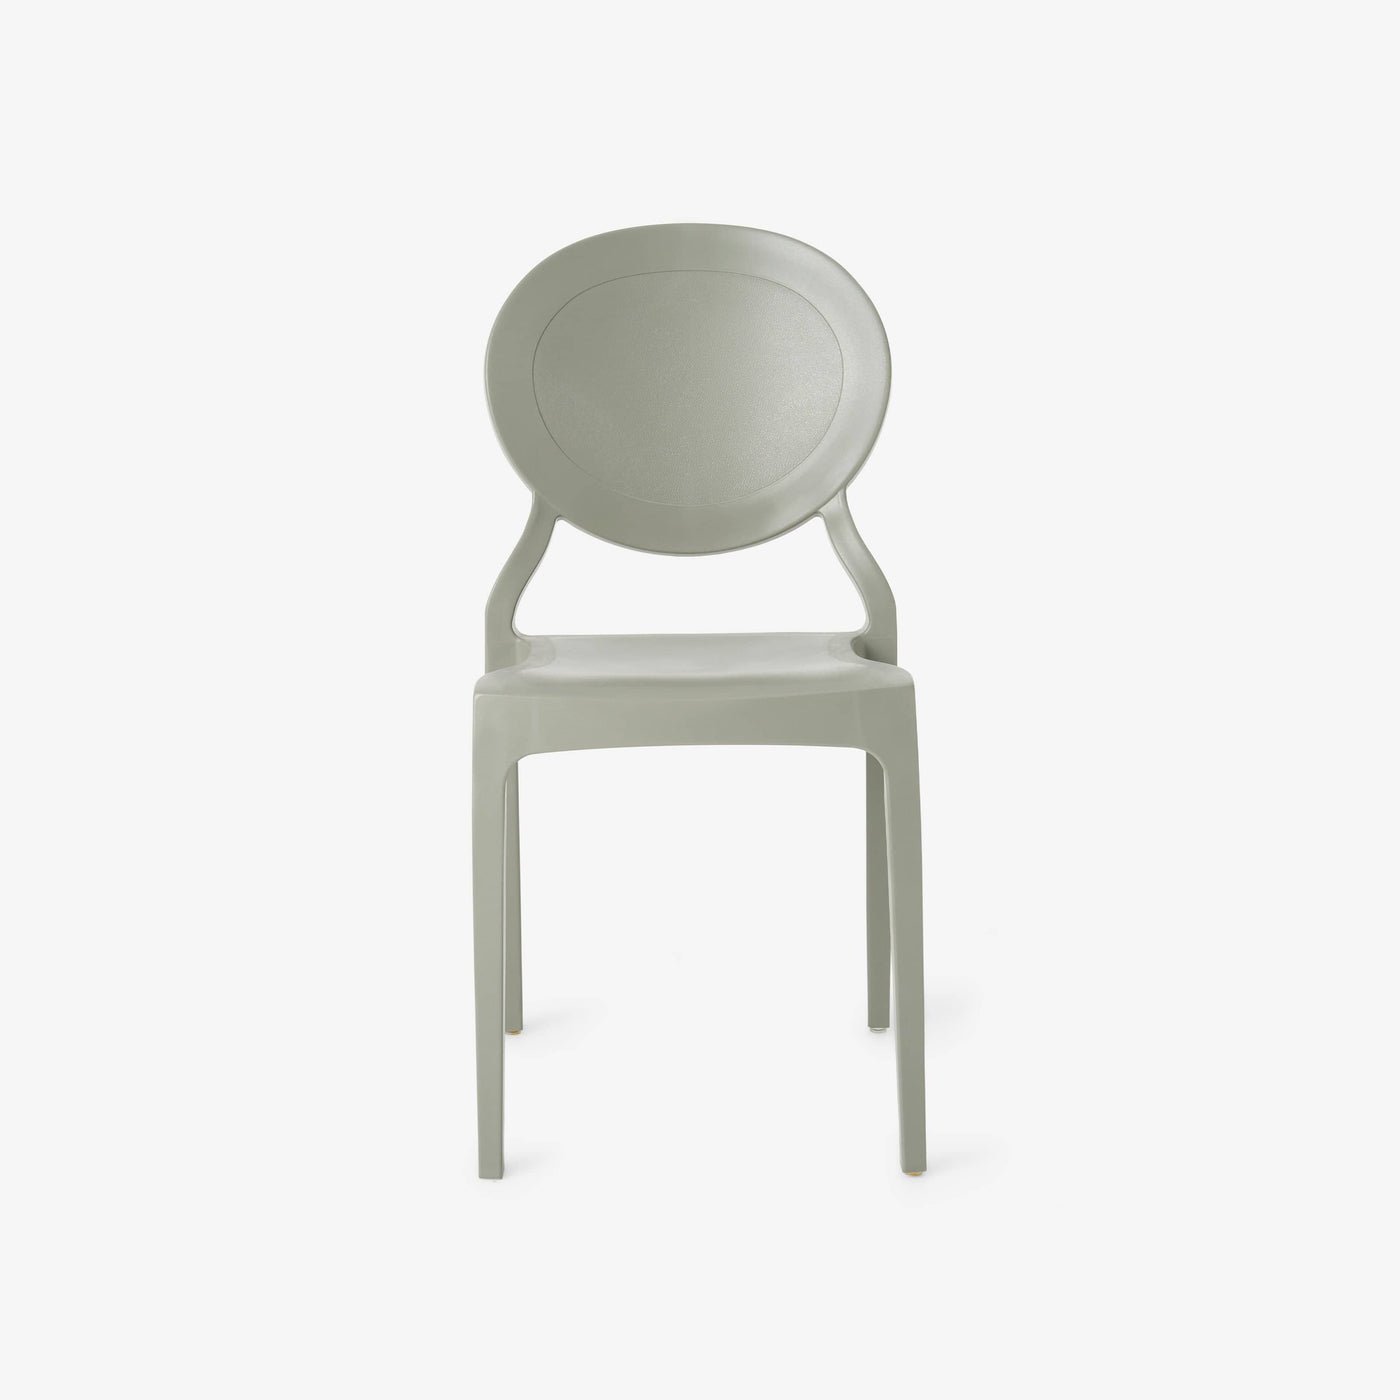 Rotus Set of 4 Chairs, Cement Grey - 1